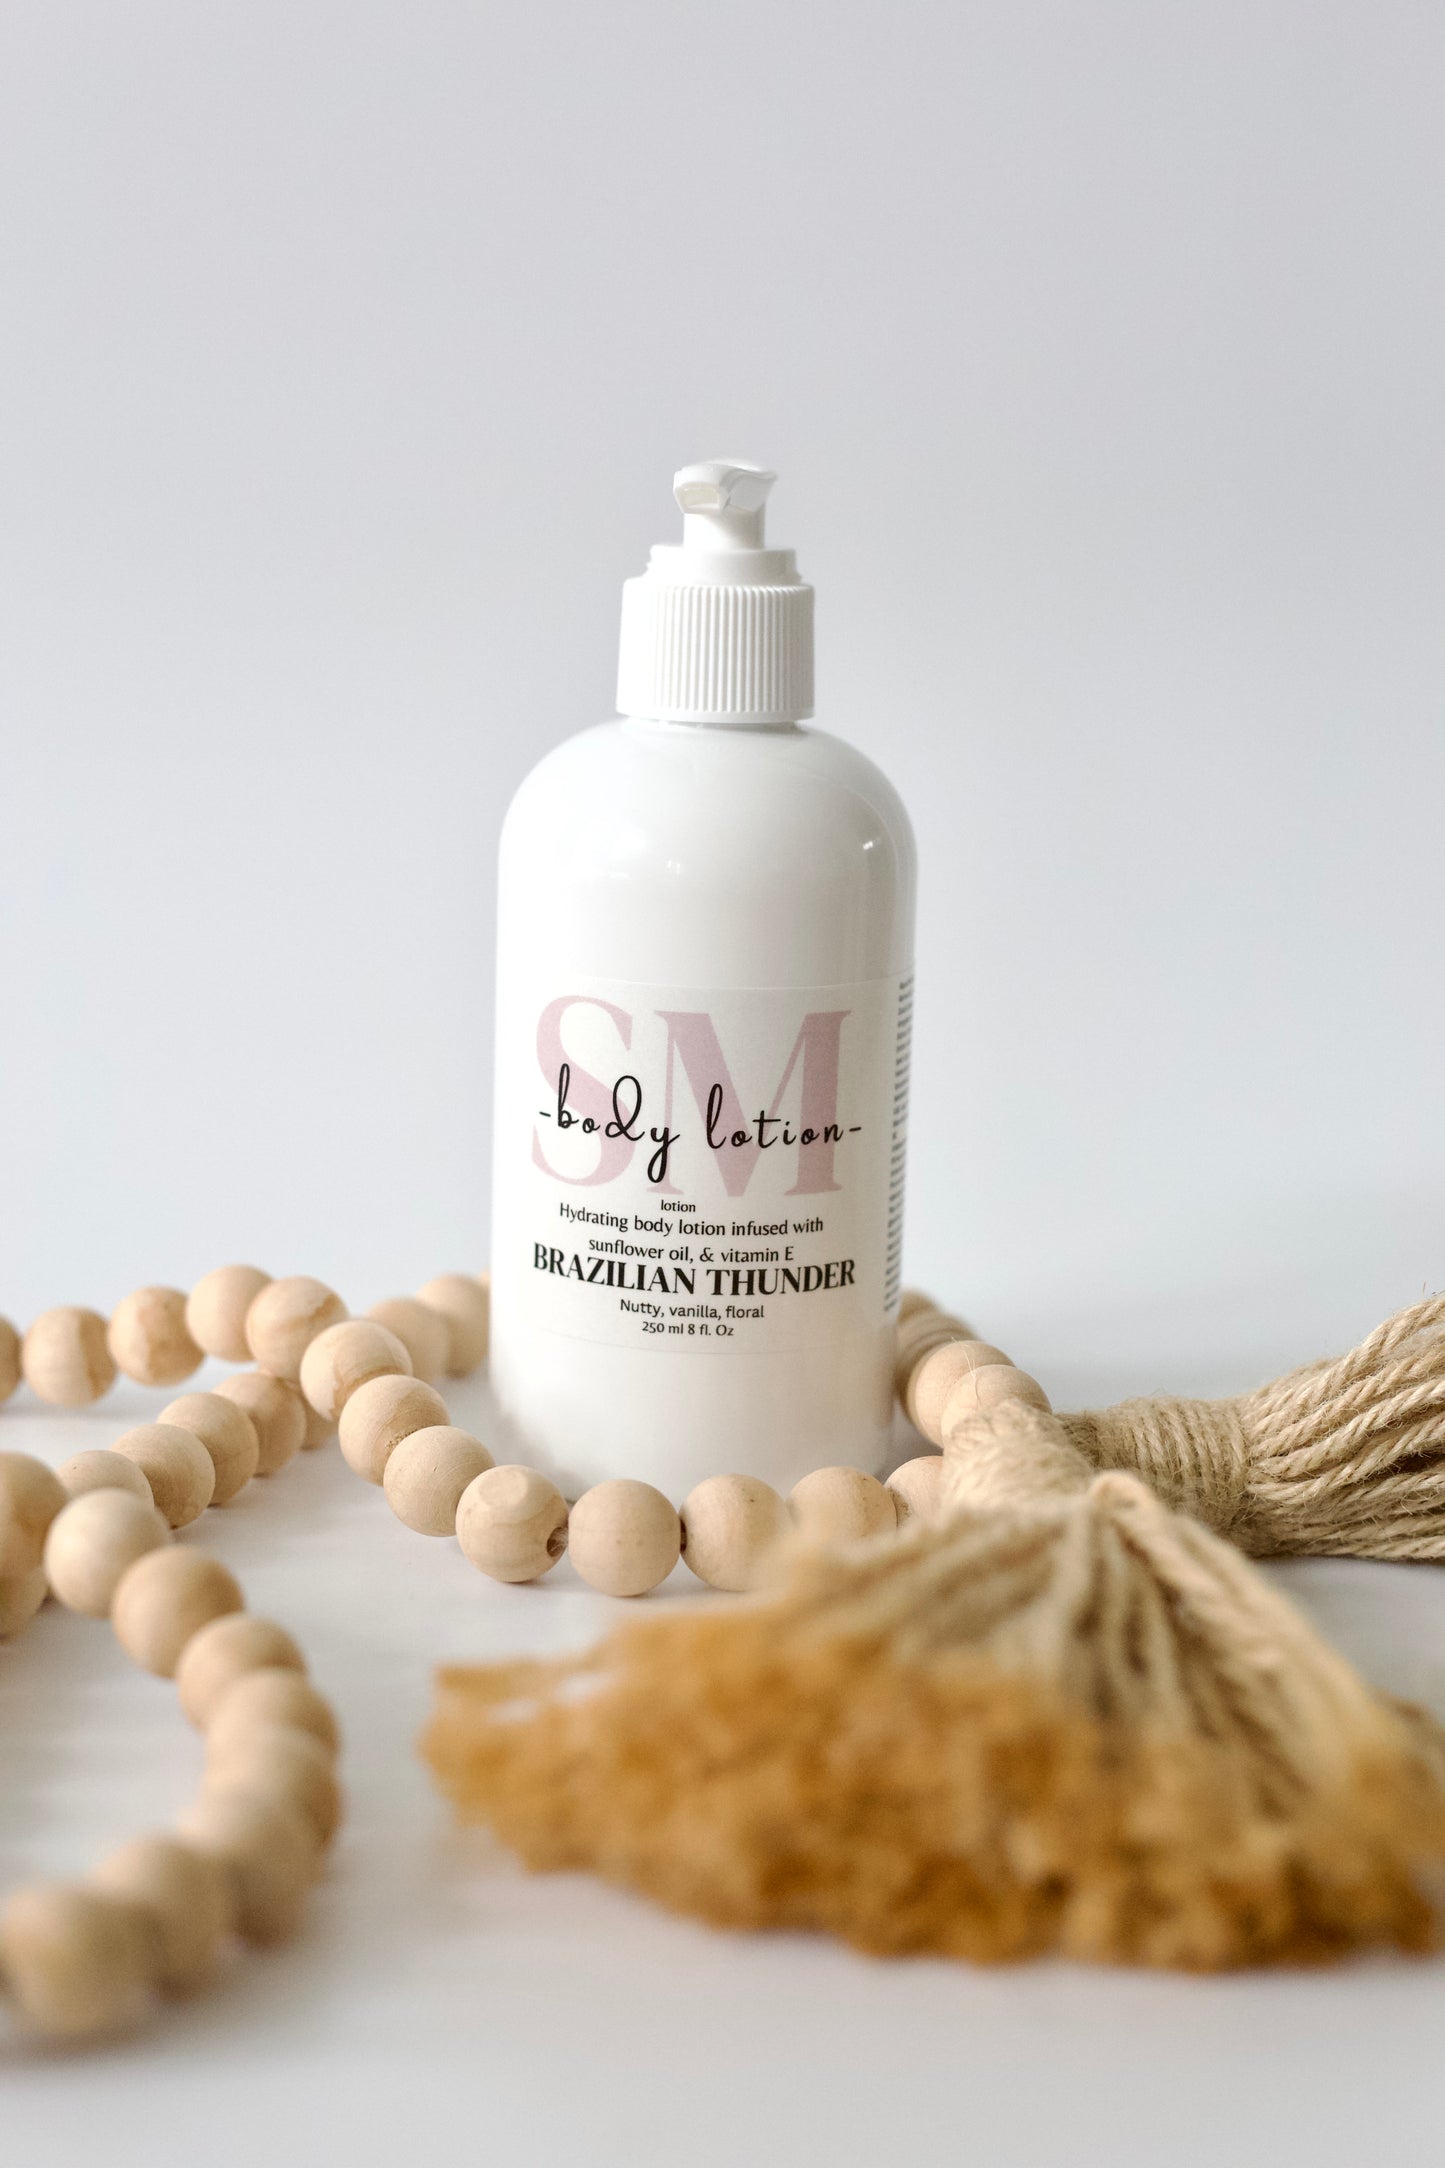 Oil infused, plant based body lotion